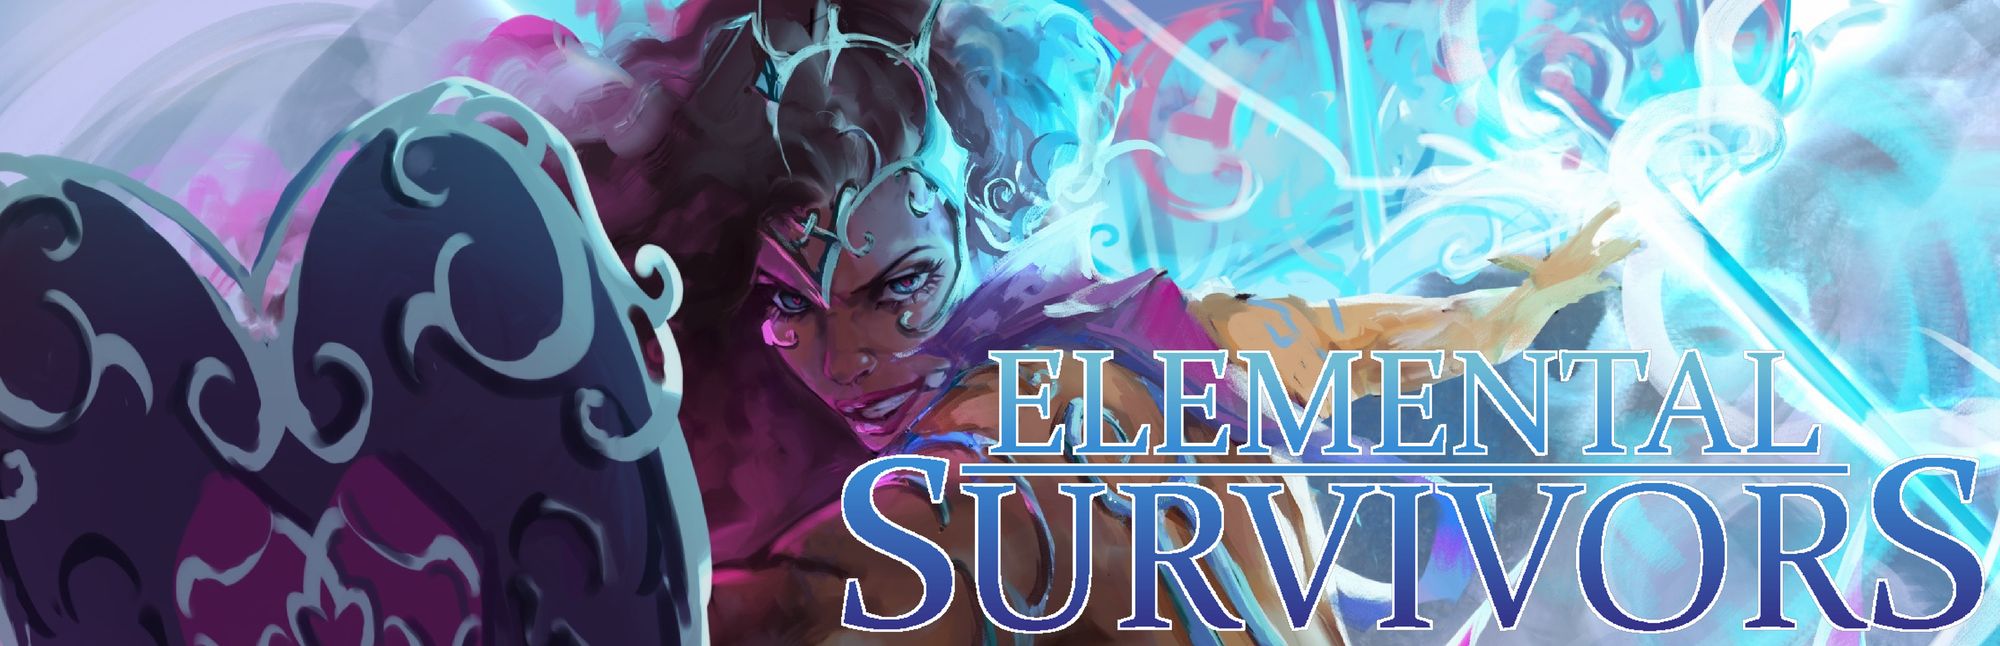 Elemental Survivors launches into Early Access.